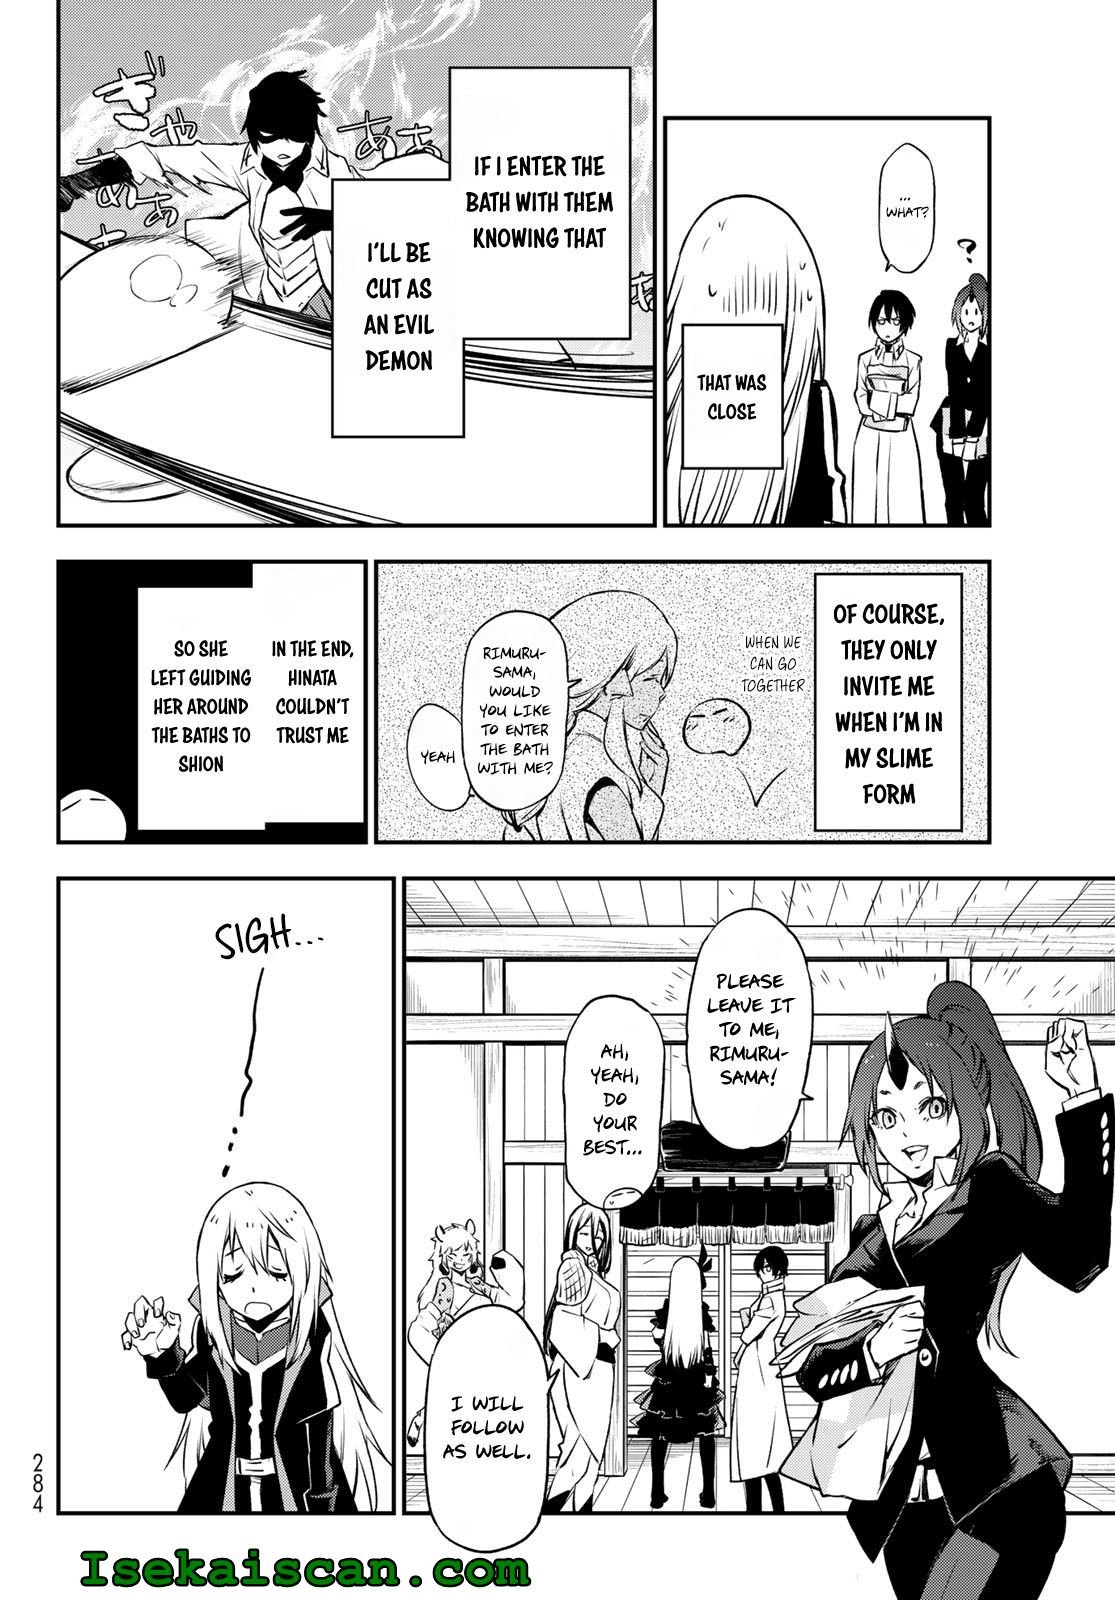 That Time I Got Reincarnated as a Slime, Chapter 99